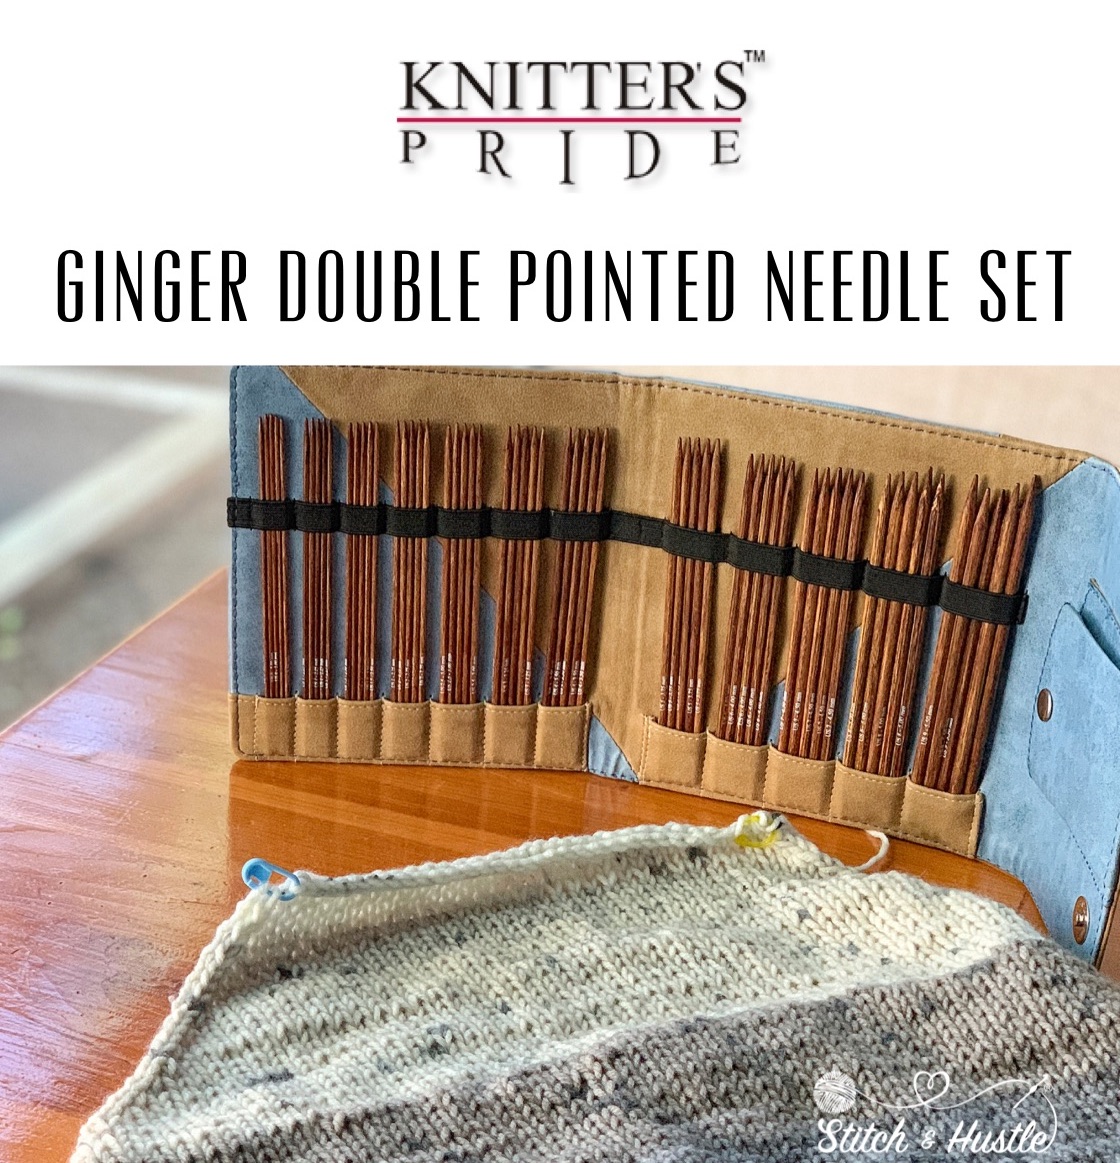 A Set Of DPN To Make My Knitting Heart Smile - Knitter's Pride